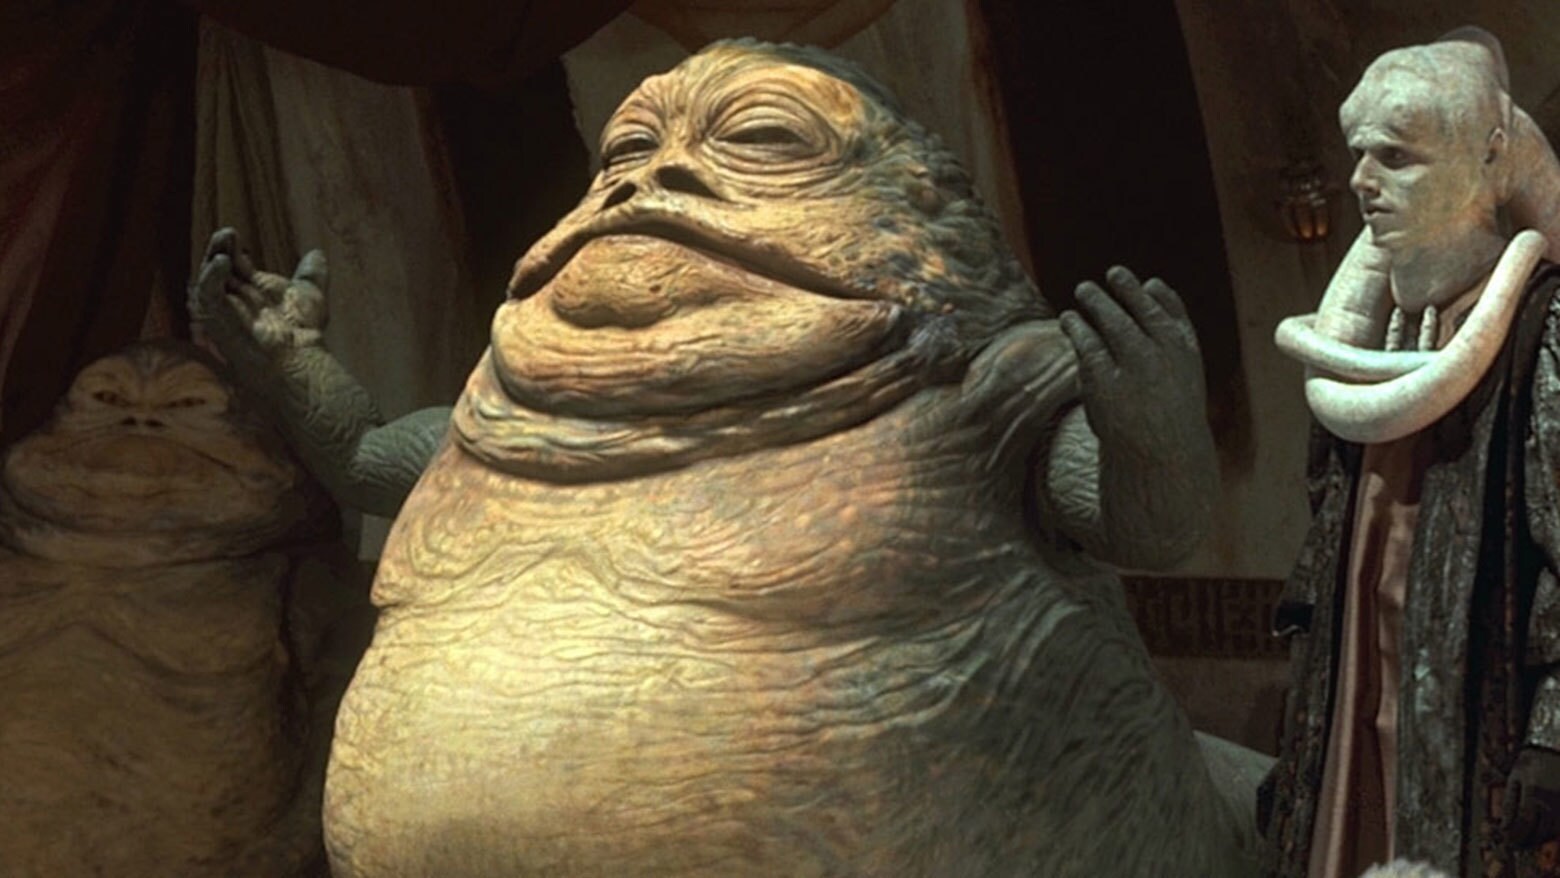 Guillermo del Toro's Star Wars film would have focused on Jabba the Hutt